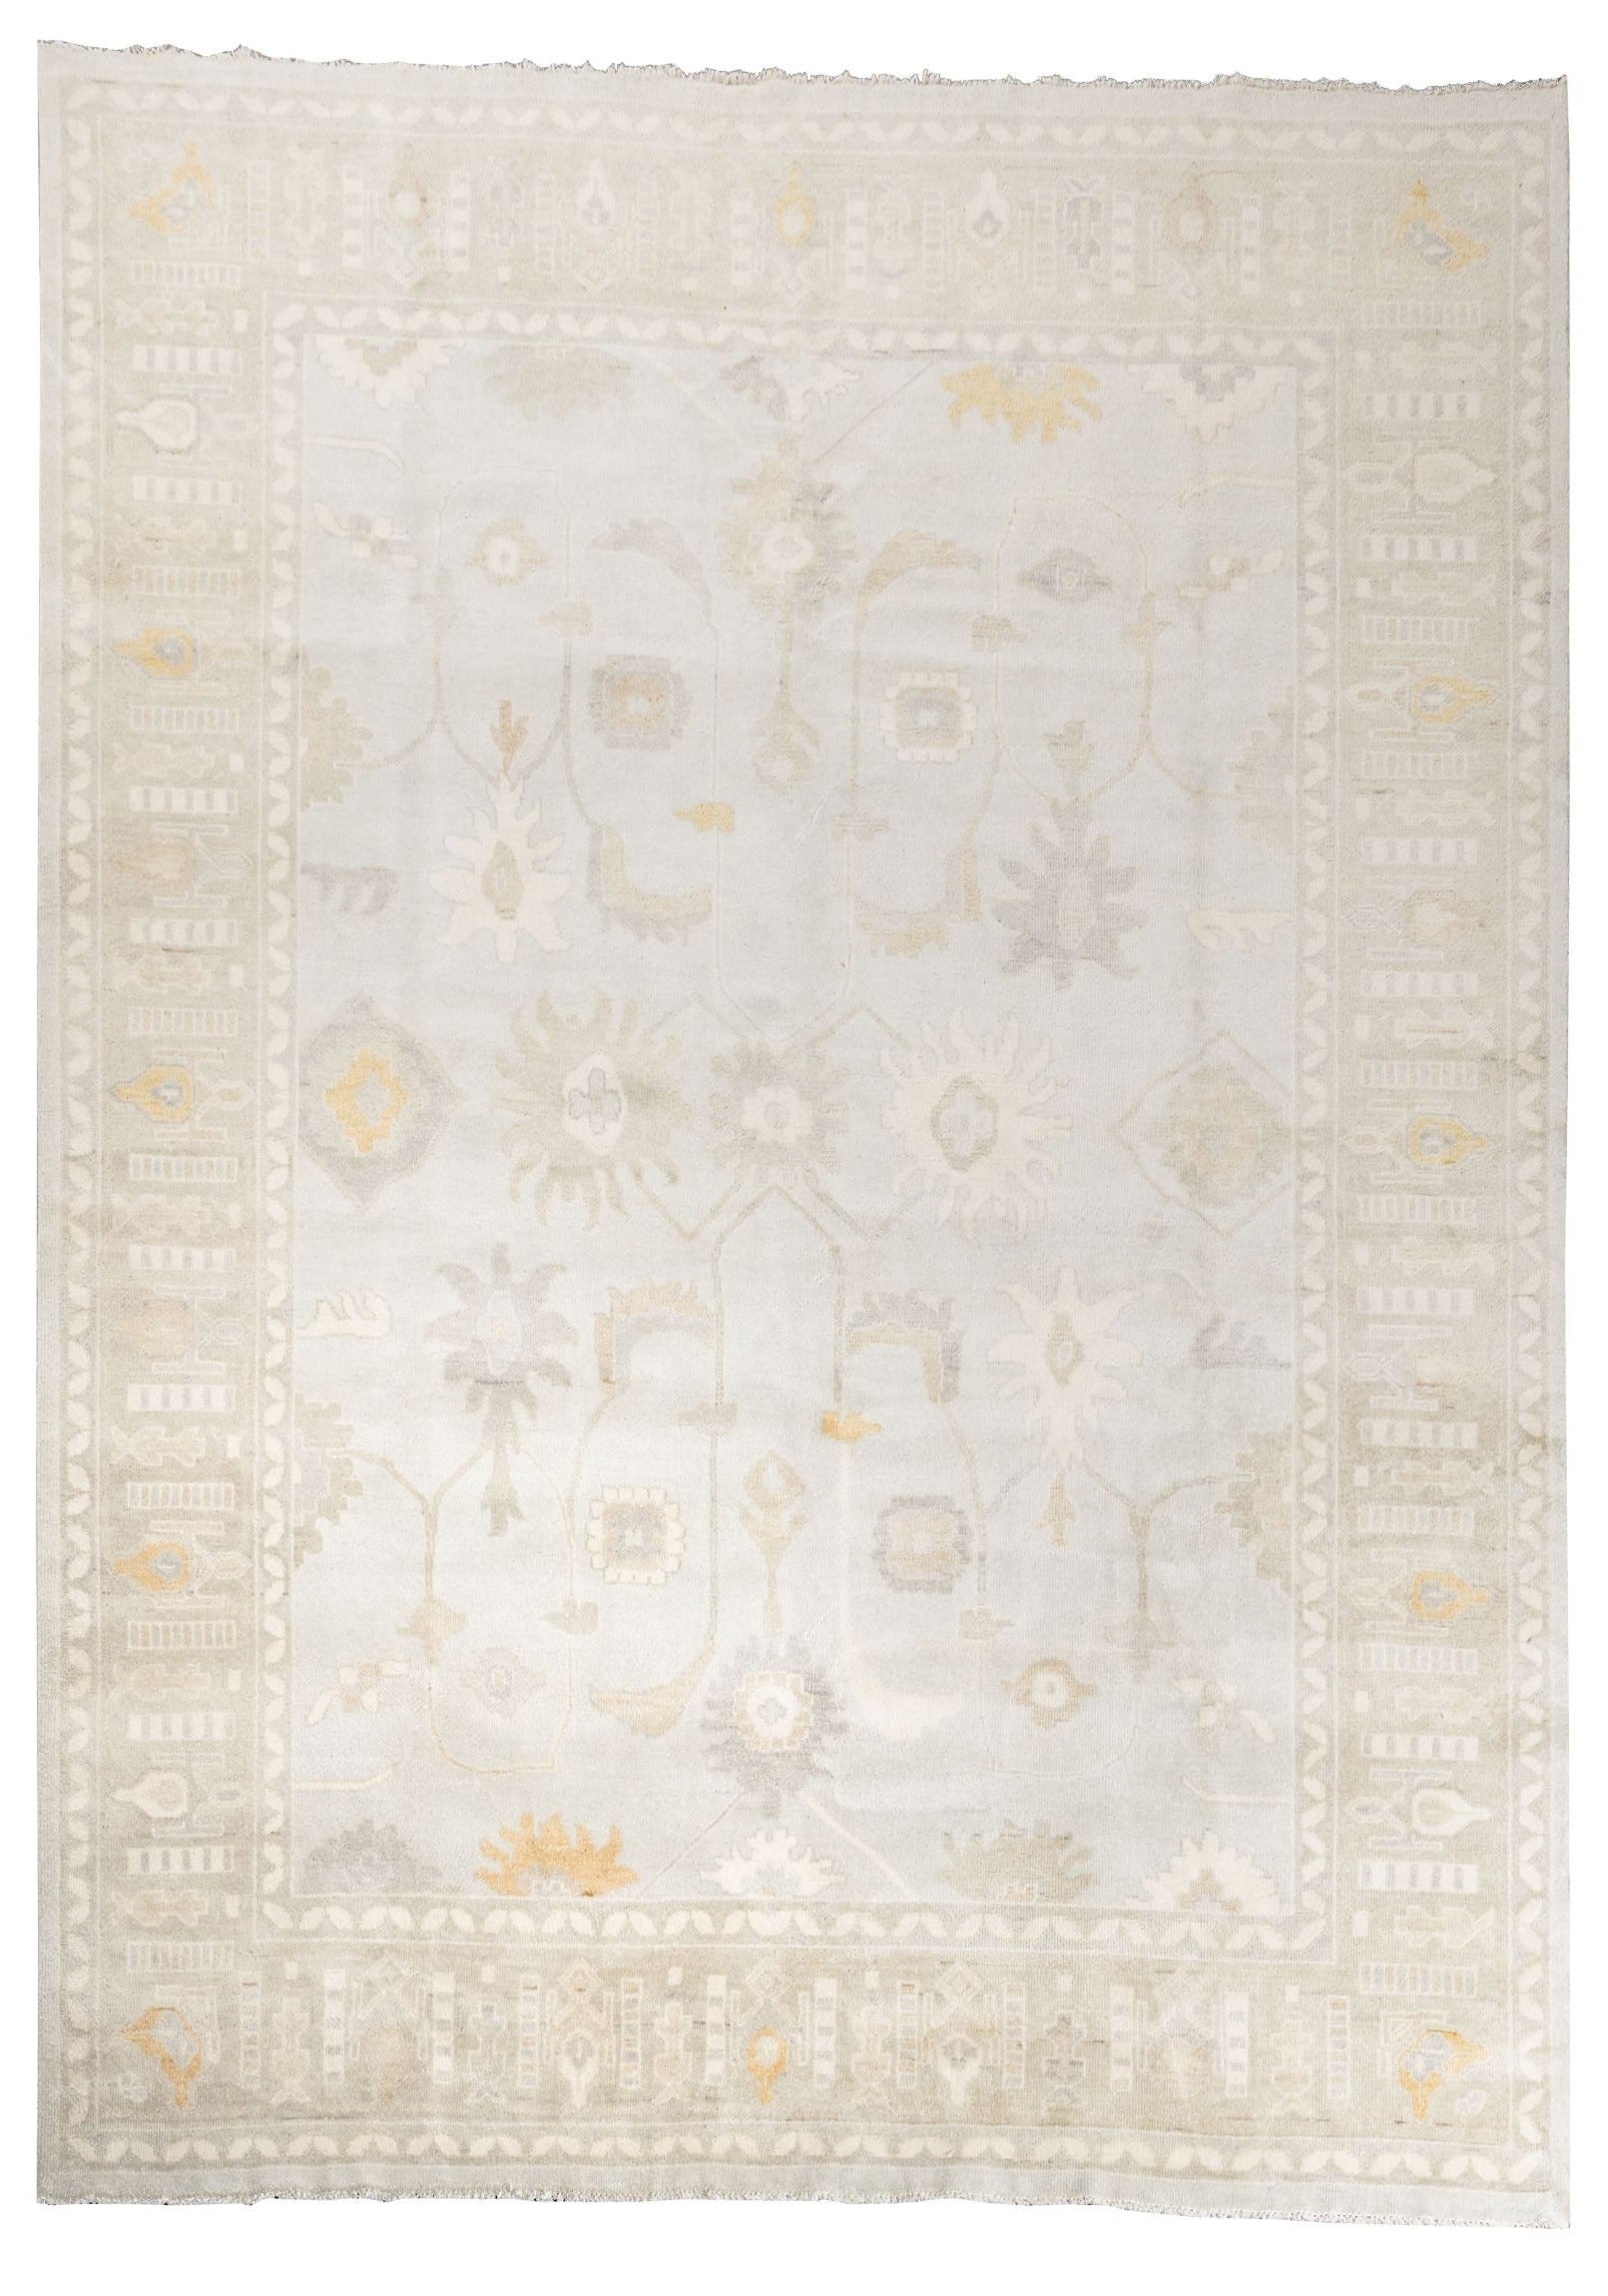 Neutral toned and hand-knotted Oushak style rug made of 100% New Zealand wool. This rug is comprised of tan, beige, brown, ivory, and gray colors.